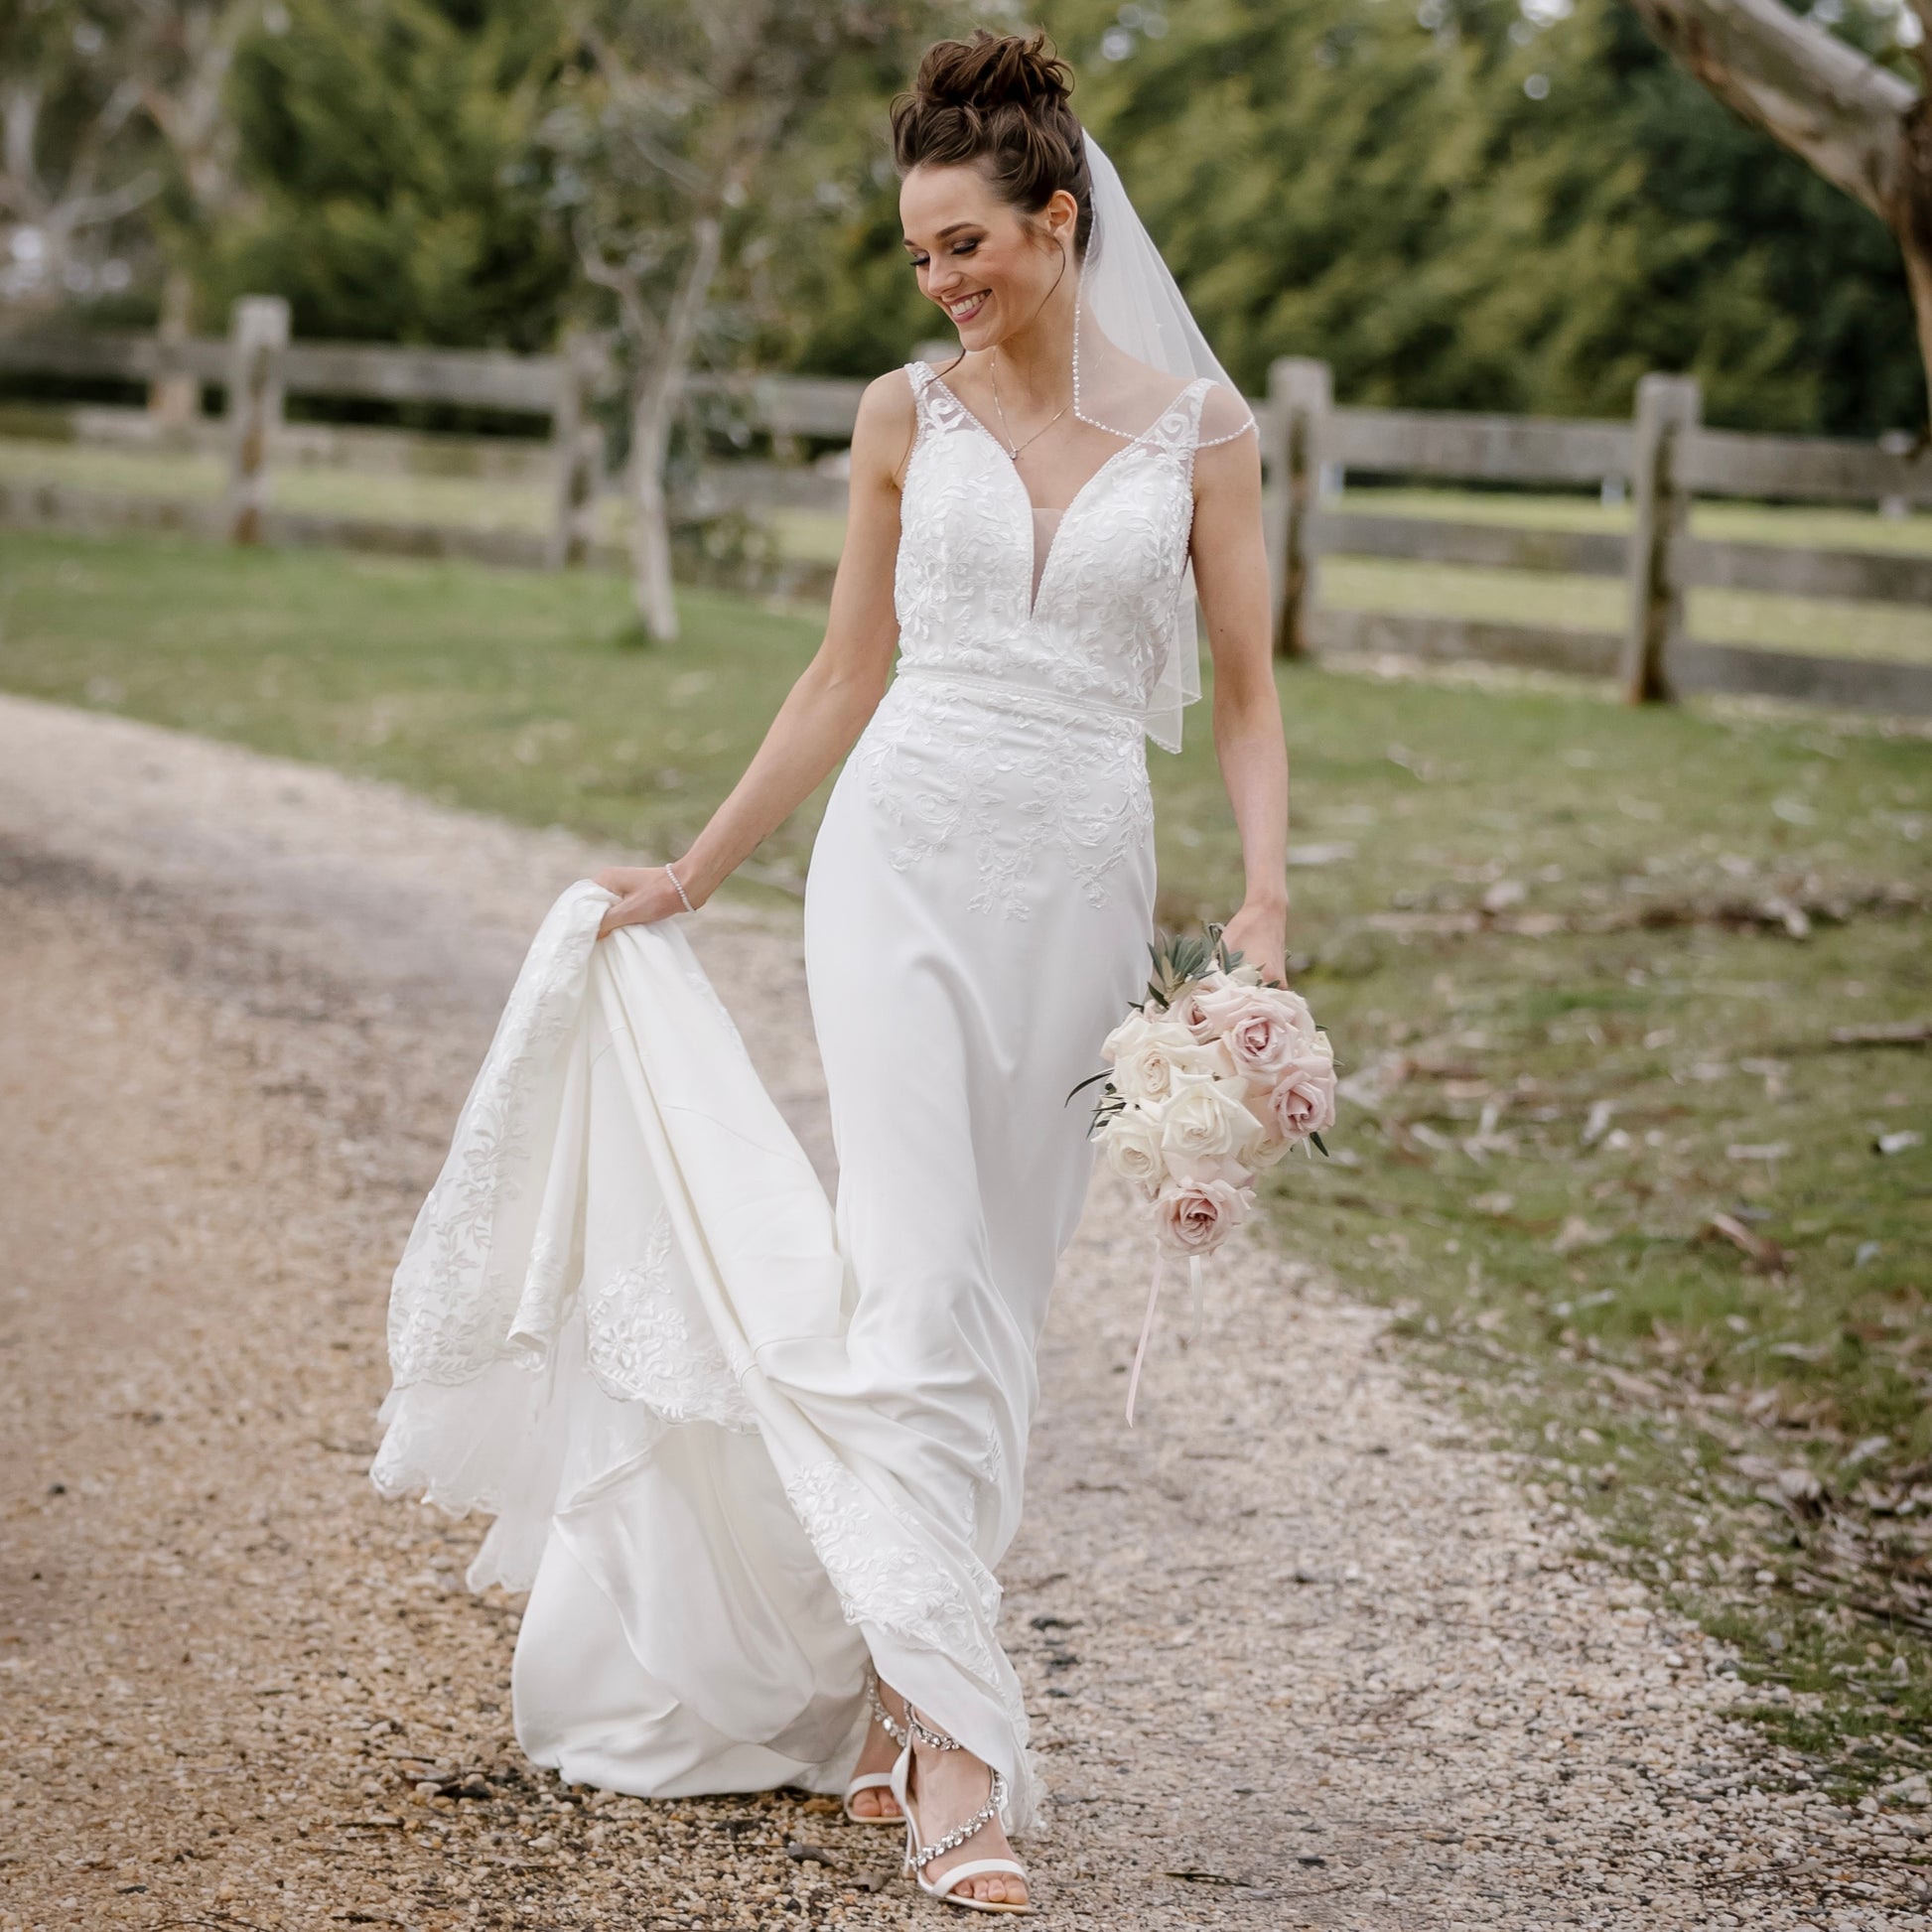 "A stunning Venus Wedding Gown inspired by the romantic charm of Venice. The gown features a plunging neckline with delicate tulle illusion insert and intricate beadwork. The fit and flare silhouette flatters the bride's curves, while lace details adorn the hem. The back showcases a V-neckline with covered buttons, and illusion skintone tulle inserts add a subtly sexy touch. The gown is completed with a chapel train, creating a breathtaking bridal look."